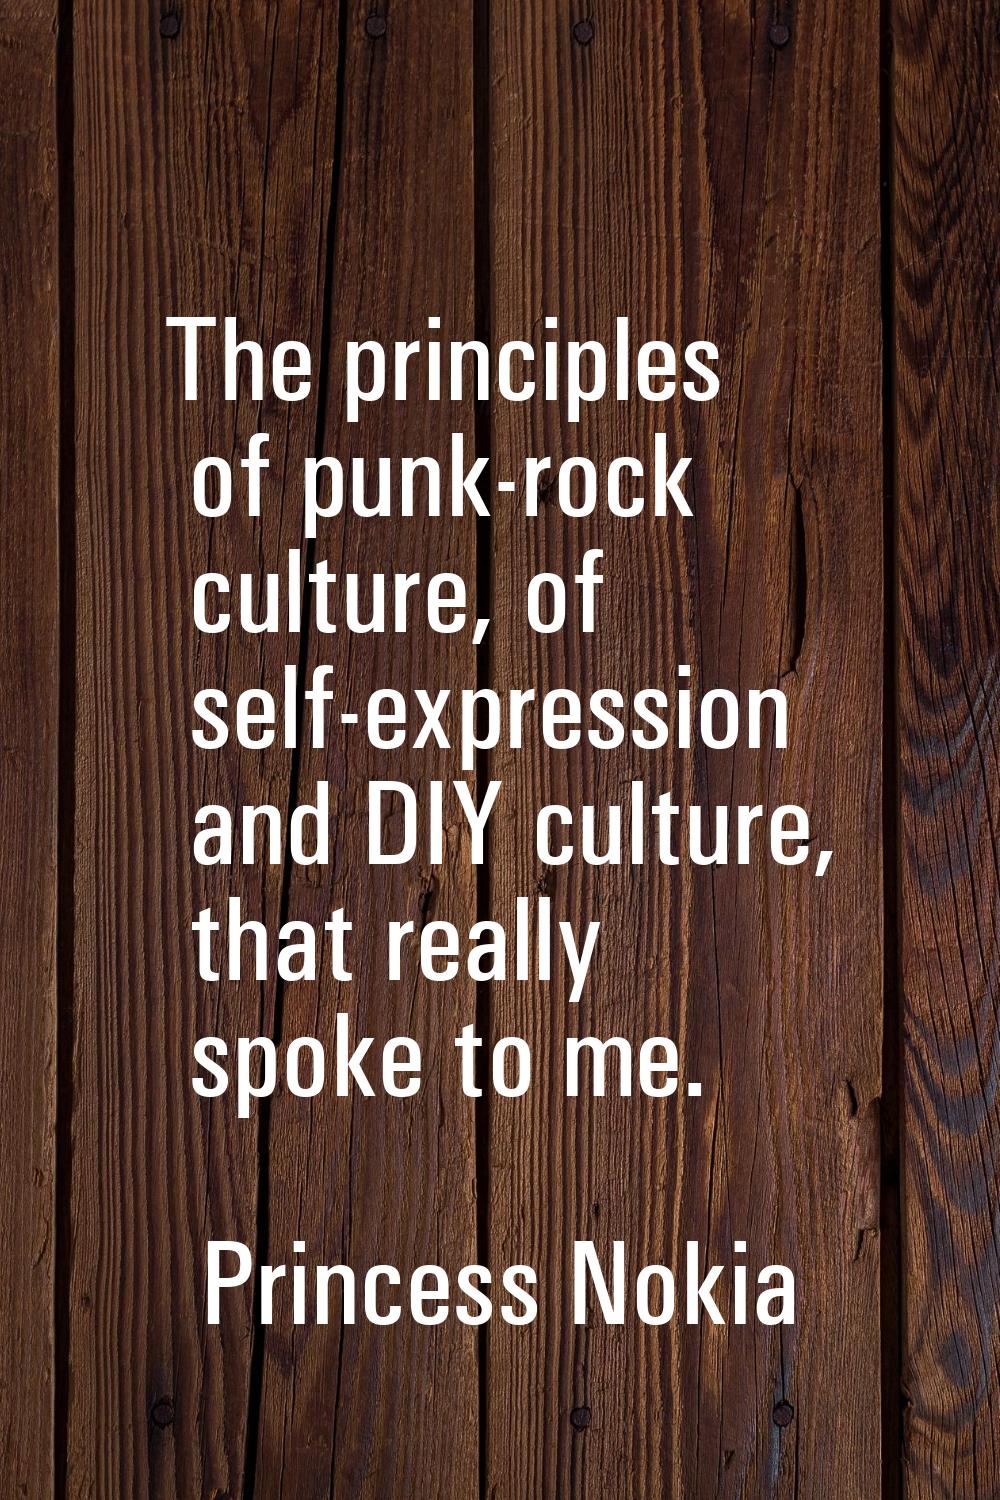 The principles of punk-rock culture, of self-expression and DIY culture, that really spoke to me.